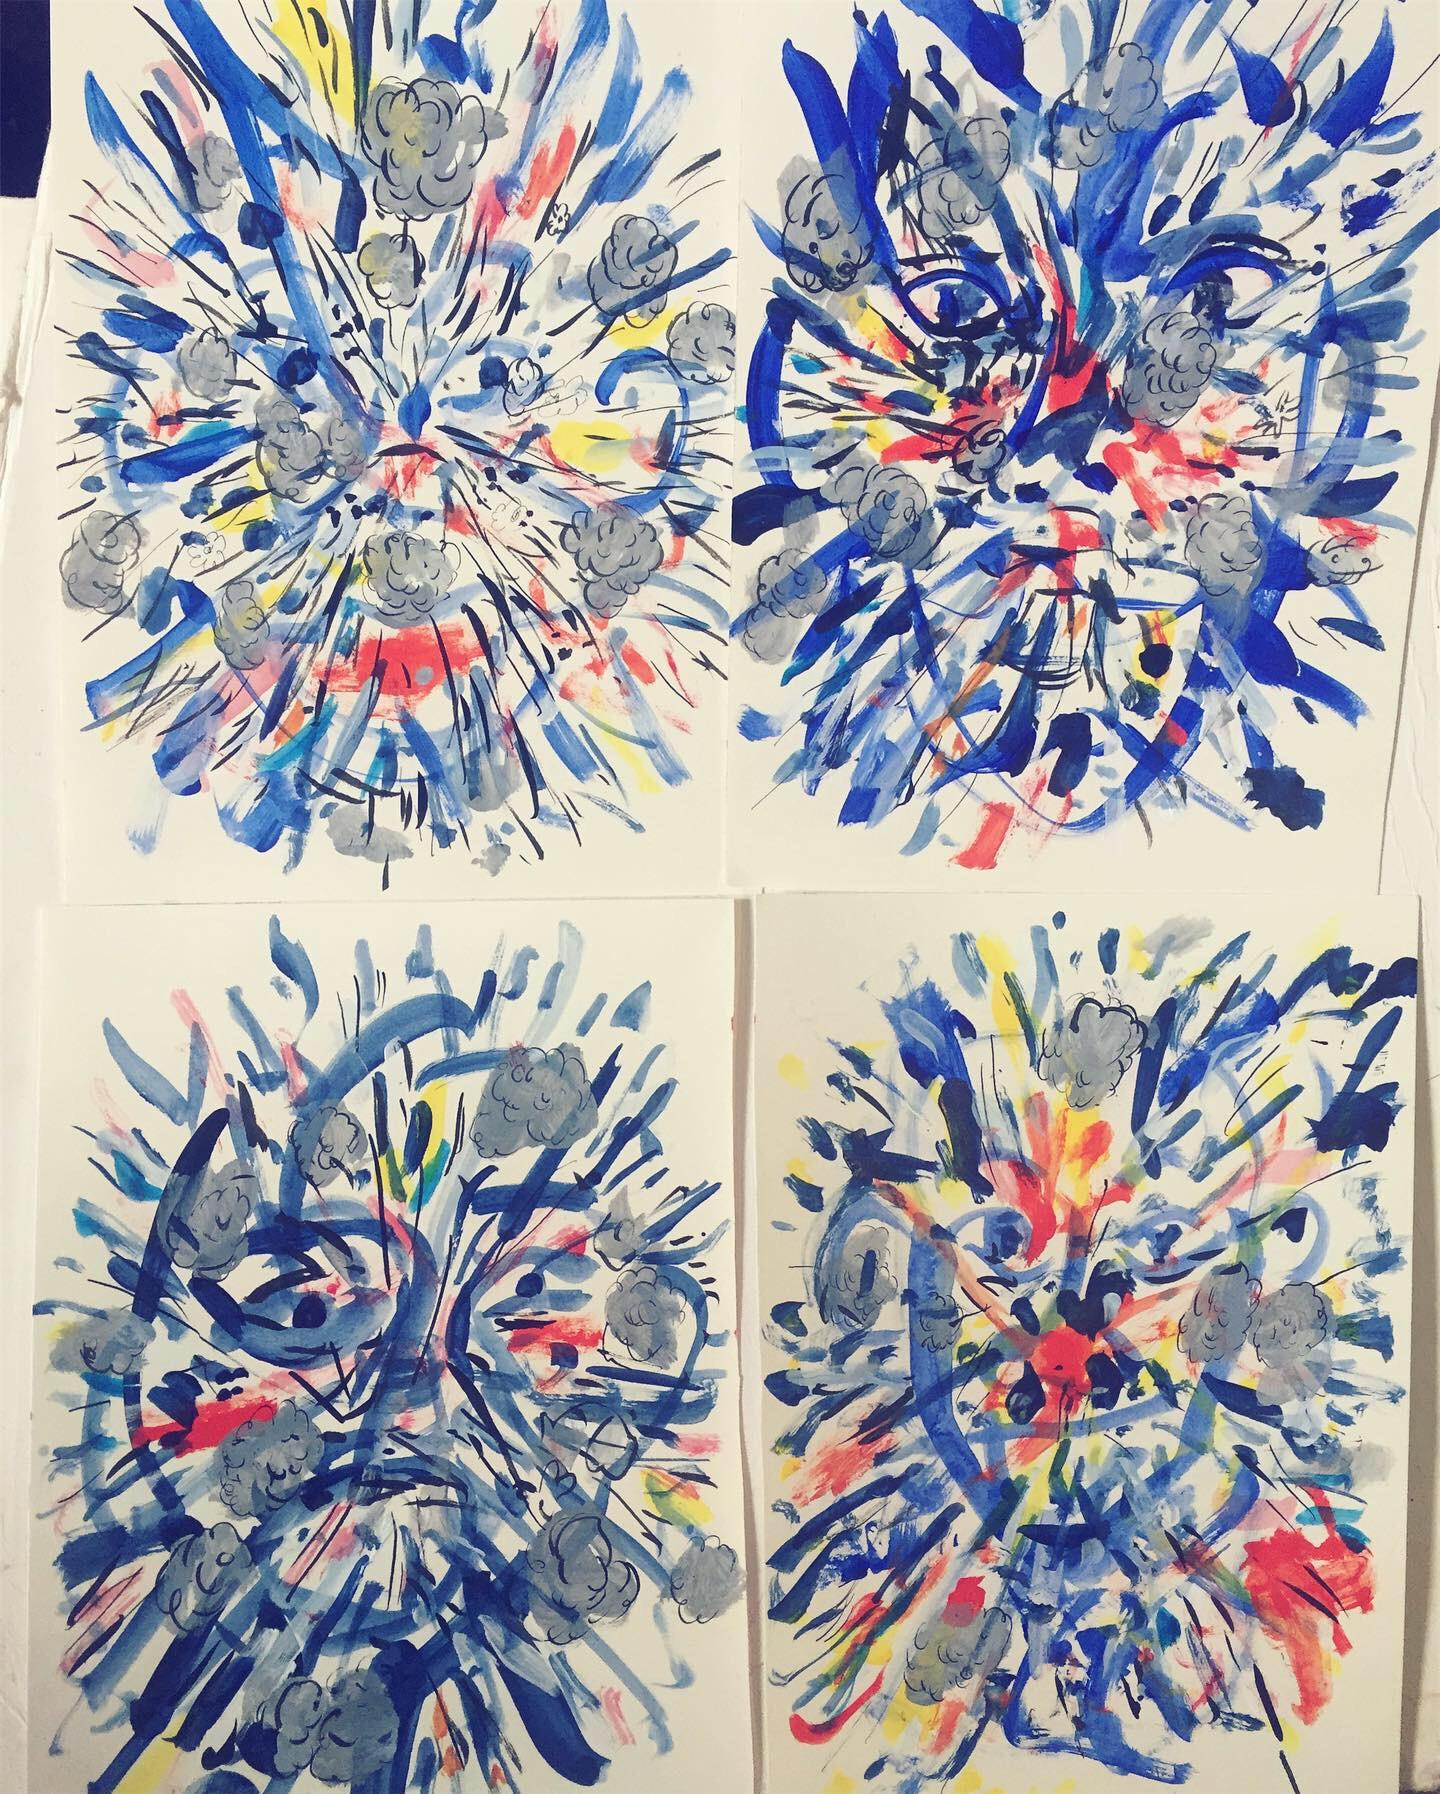 Face Explosion 4  (4 of 4 suite) 9x12 inches on paper - Art by Nina Bovasso